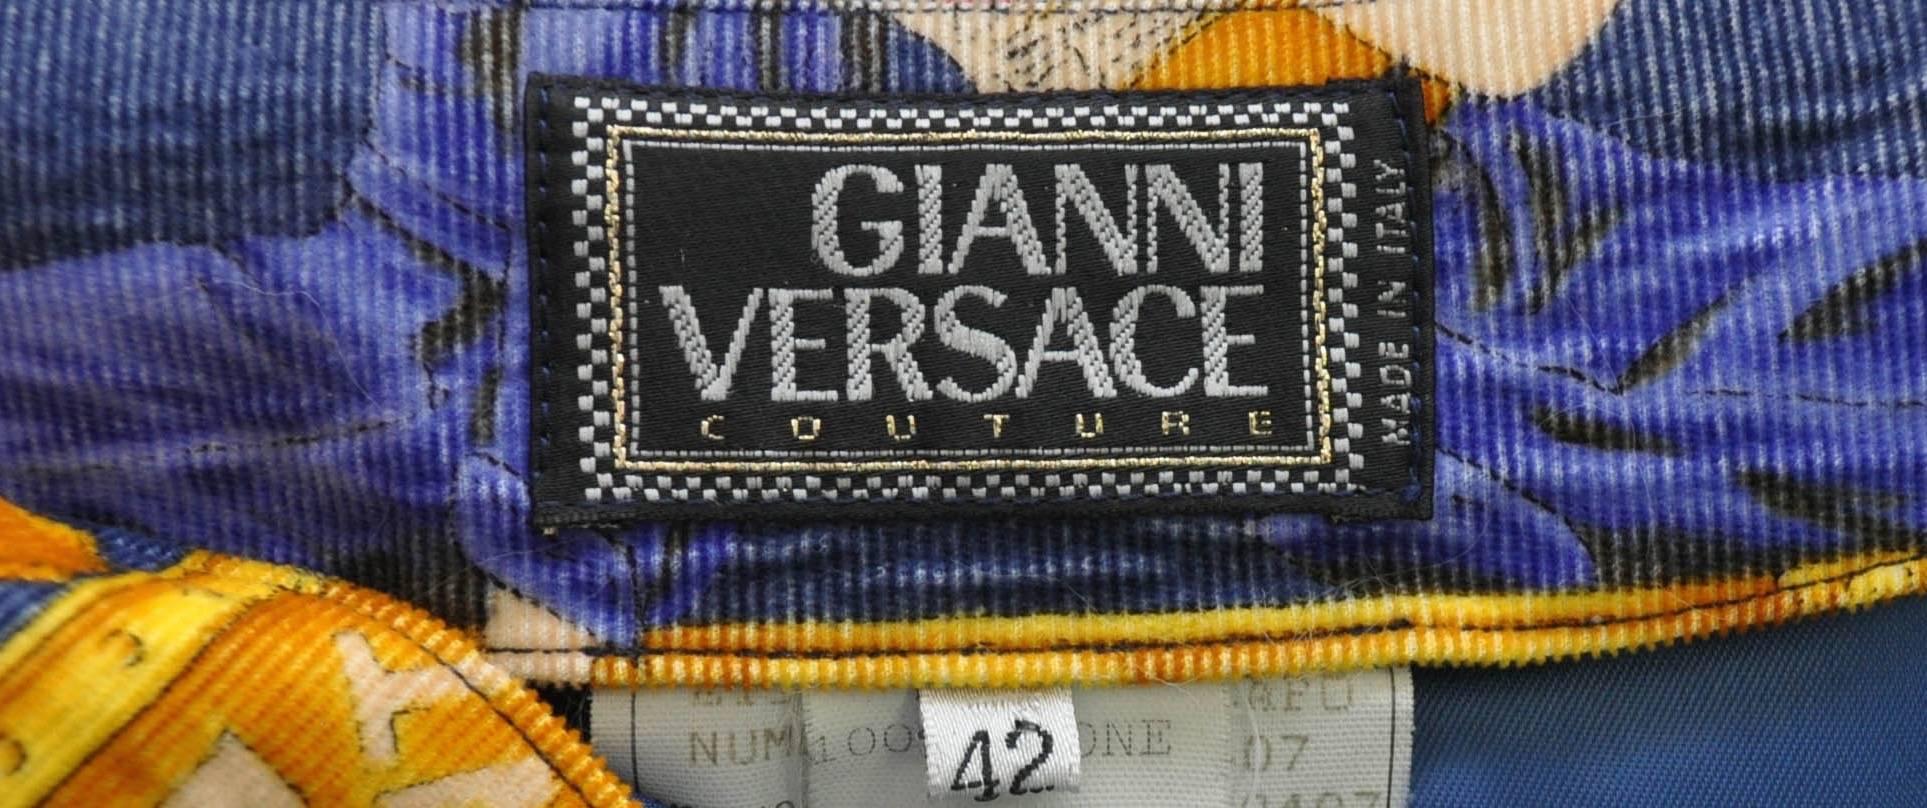 Iconic Gianni Versace Couture 